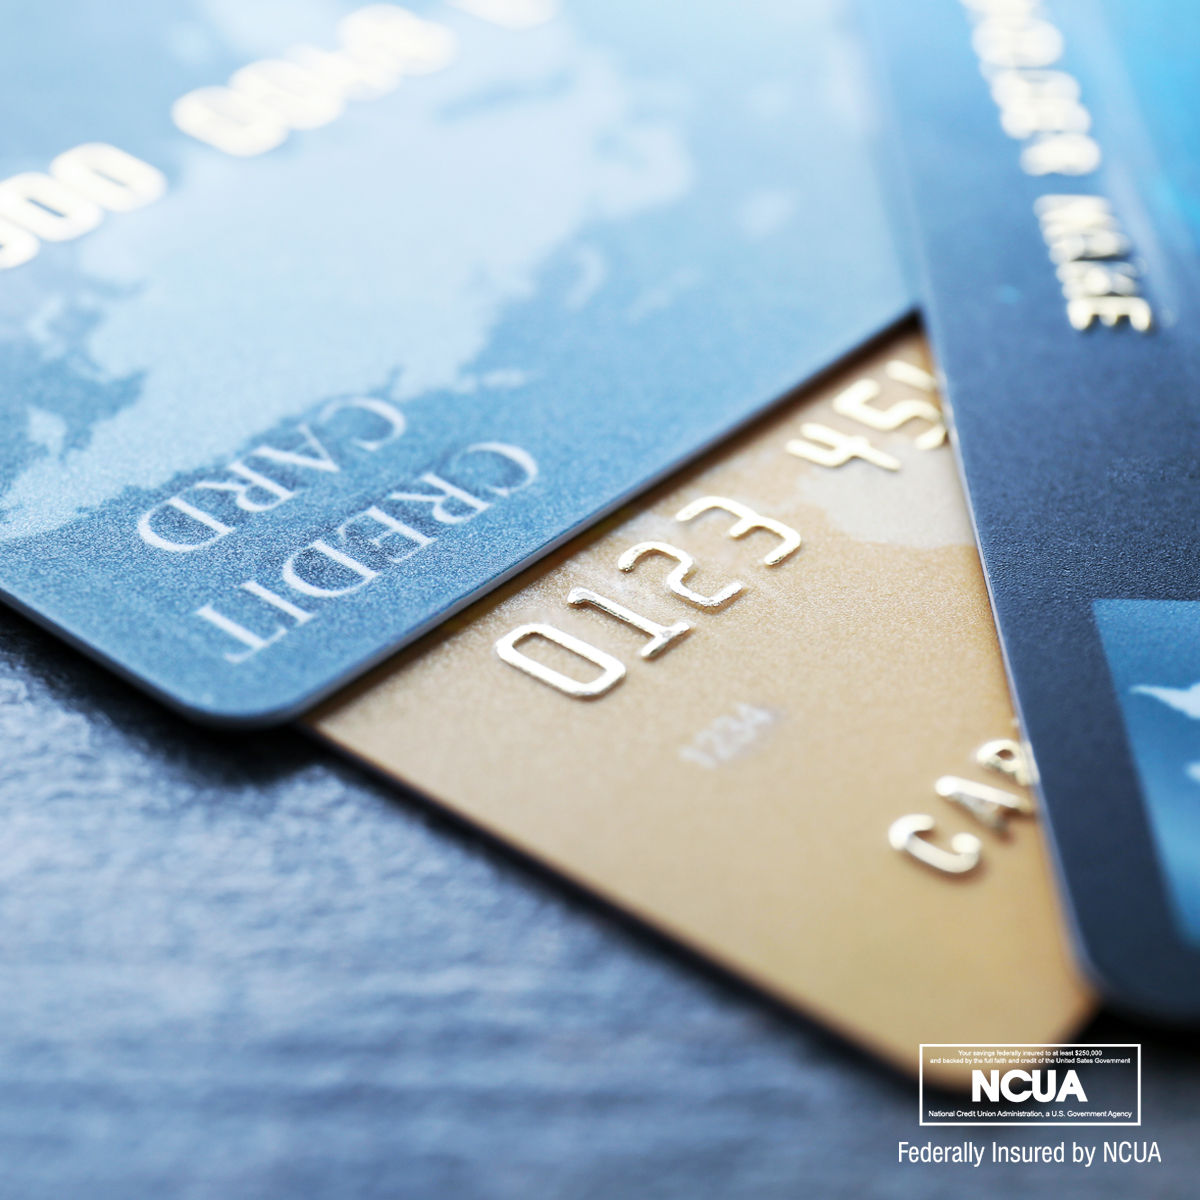 There are many benefits of obtaining a credit card from a credit union like Georgia Heritage FCU.